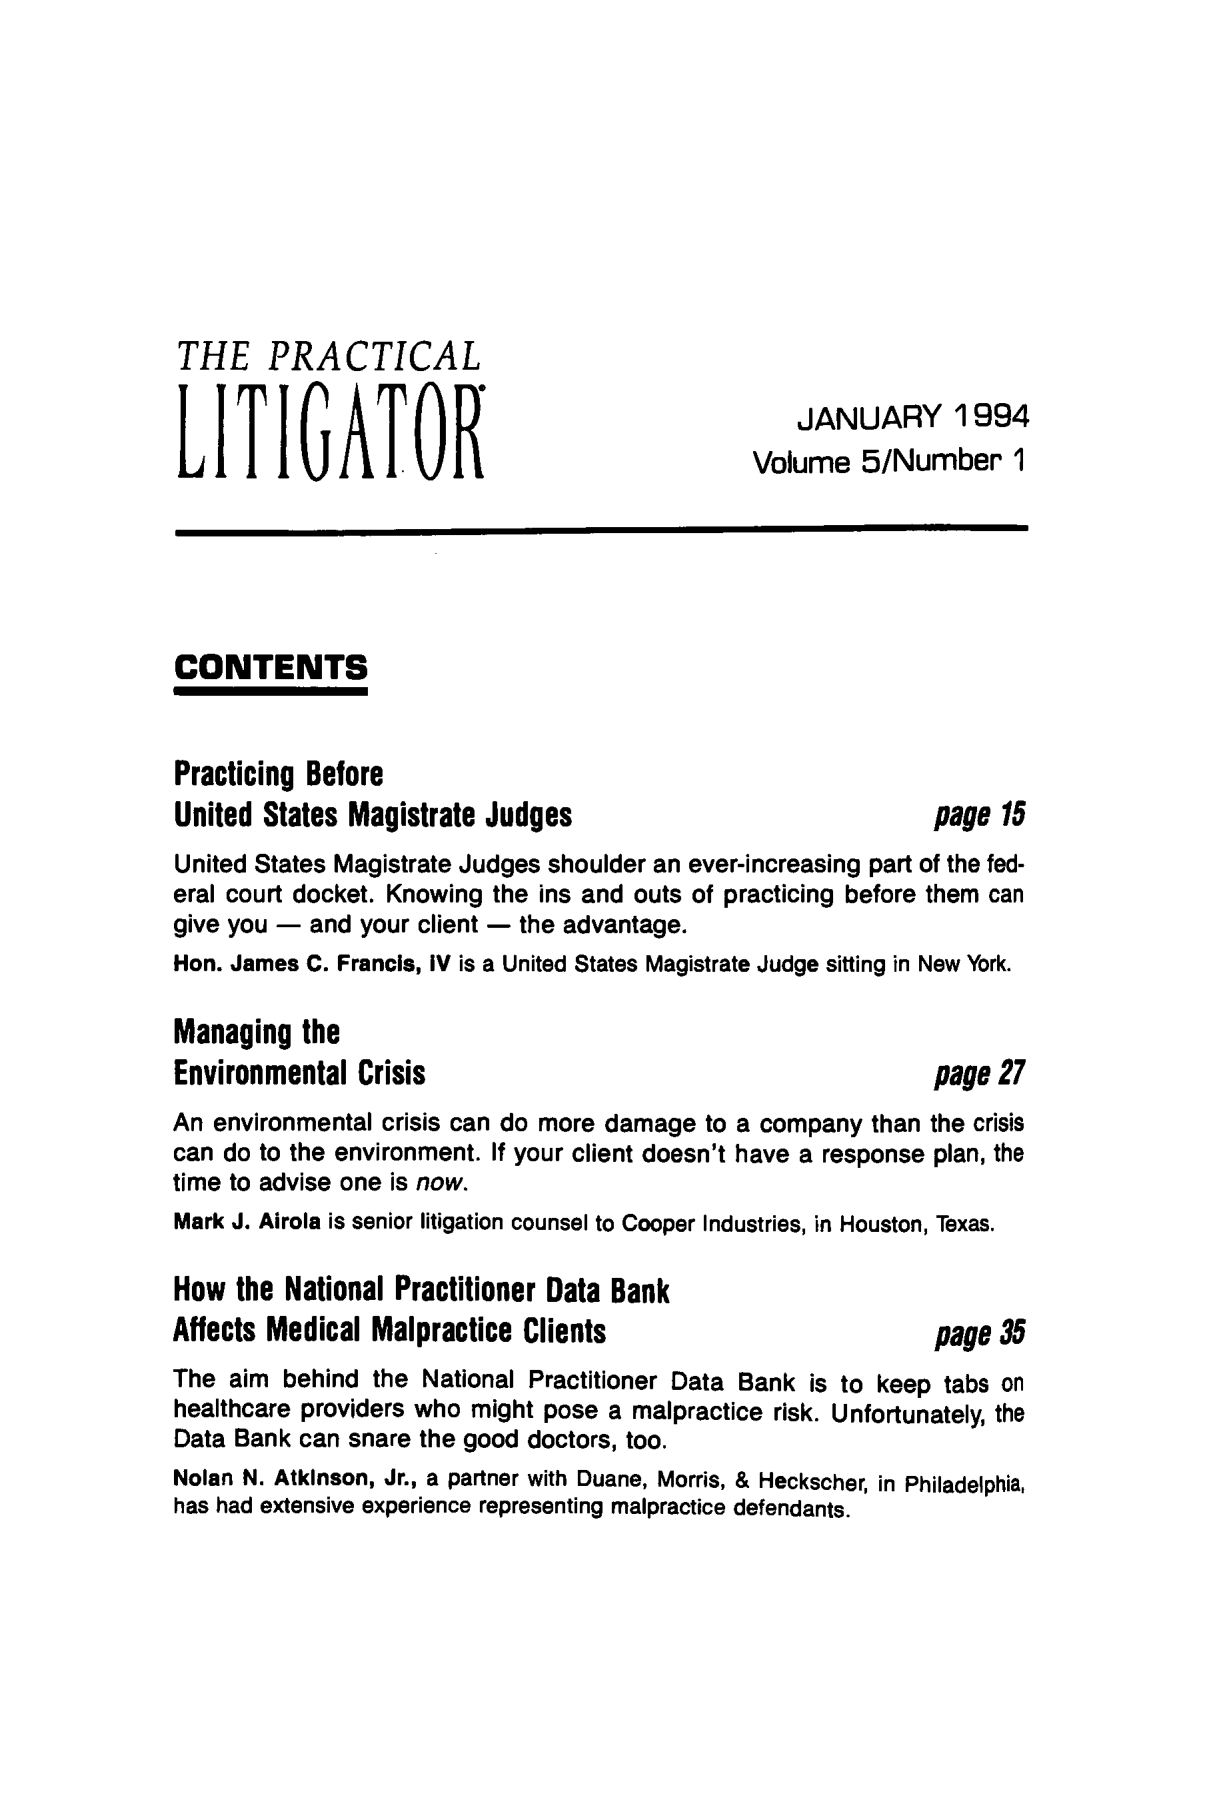 handle is hein.ali/practlit0005 and id is 1 raw text is: THE PRACTICAL
JANUARY 1994
LITIATORVolume 5/Number 1
CONTENTS
Practicing Before
United States Magistrate Judges                          page 15
United States Magistrate Judges shoulder an ever-increasing part of the fed-
eral court docket. Knowing the ins and outs of practicing before them can
give you - and your client - the advantage.
Hon. James C. Francis, IV is a United States Magistrate Judge sitting in New York.
Managing the
Environmental Crisis                                     page 27
An environmental crisis can do more damage to a company than the crisis
can do to the environment. If your client doesn't have a response plan, the
time to advise one is now.
Mark J. Airola is senior litigation counsel to Cooper Industries, in Houston, Texas.
How the National Practitioner Data Bank
Affects Medical Malpractice Clients                      page 35
The aim behind the National Practitioner Data Bank is to keep tabs on
healthcare providers who might pose a malpractice risk. Unfortunately, the
Data Bank can snare the good doctors, too.
Nolan N. Atkinson, Jr., a partner with Duane, Morris, & Heckscher, in Philadelphia,
has had extensive experience representing malpractice defendants.


